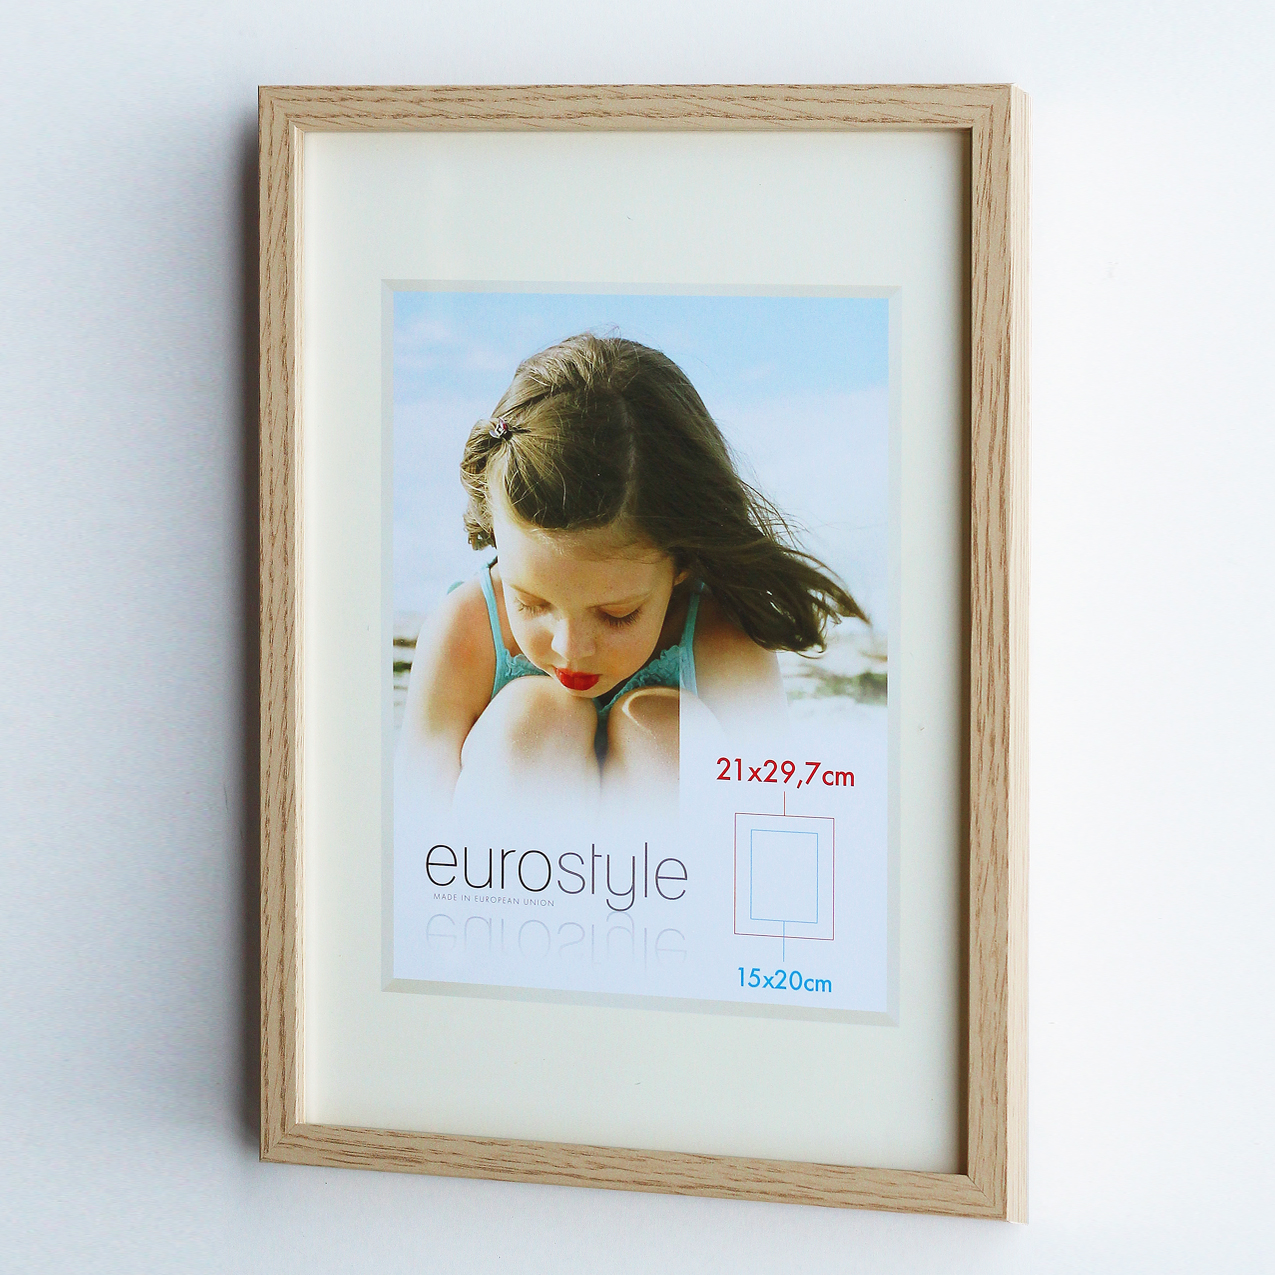 MDF Picture Frame in oak wood decor, size DIN A4, with marketing inlay. Made by Debex Suisse AG